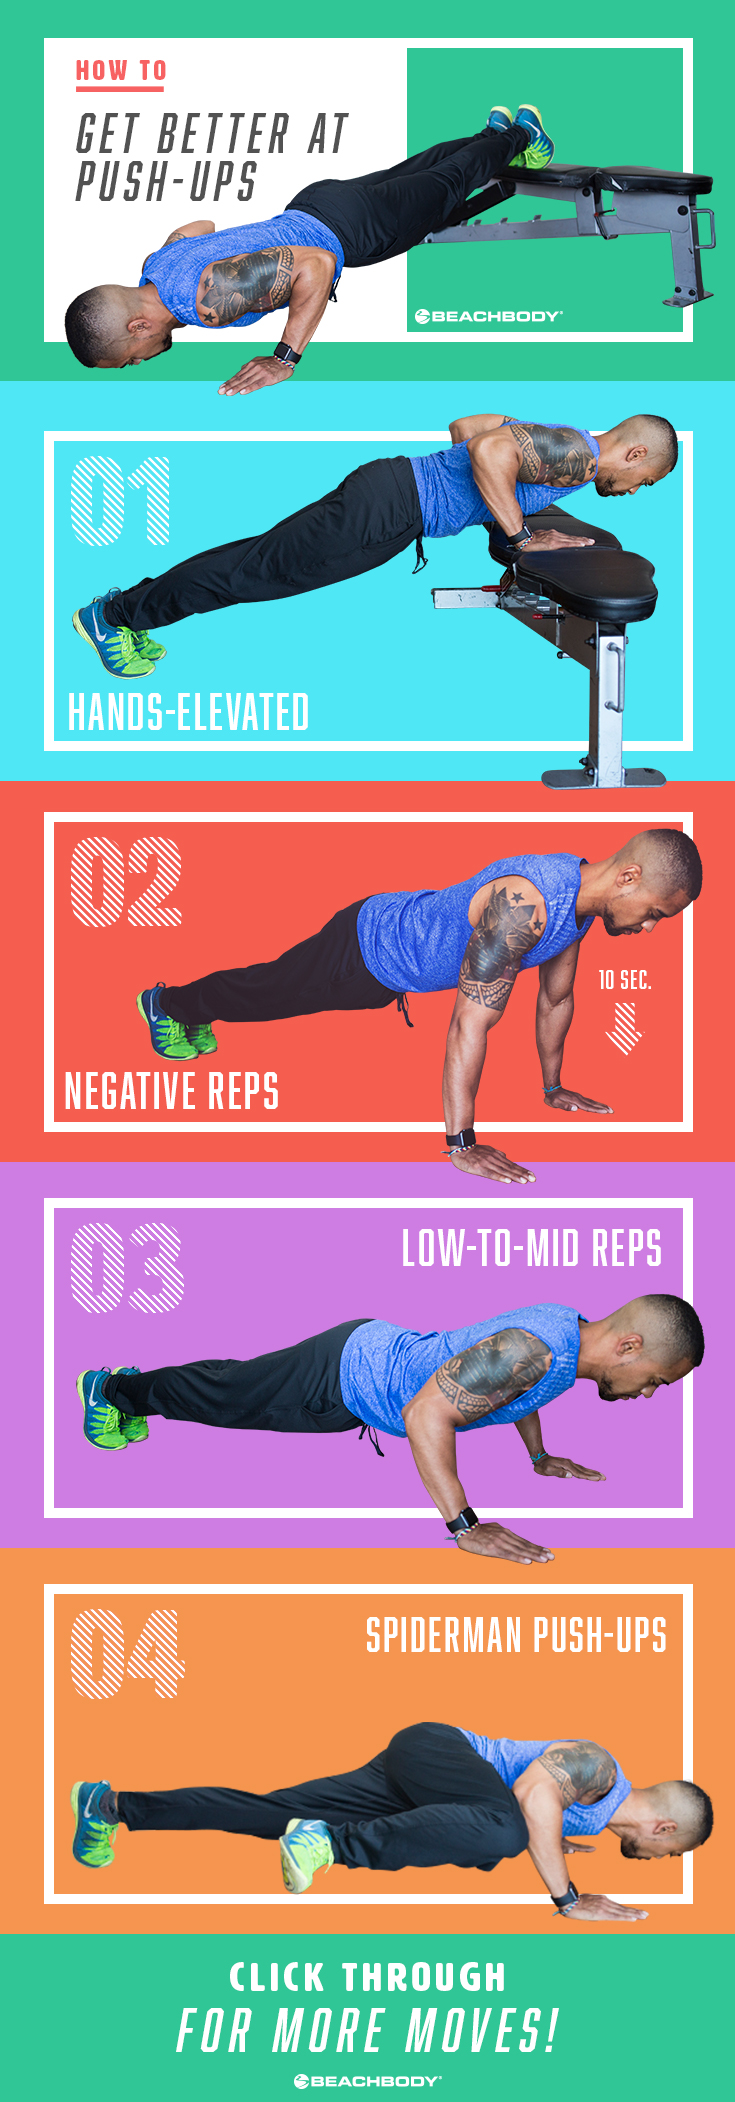 How to Get Better at Push-Ups